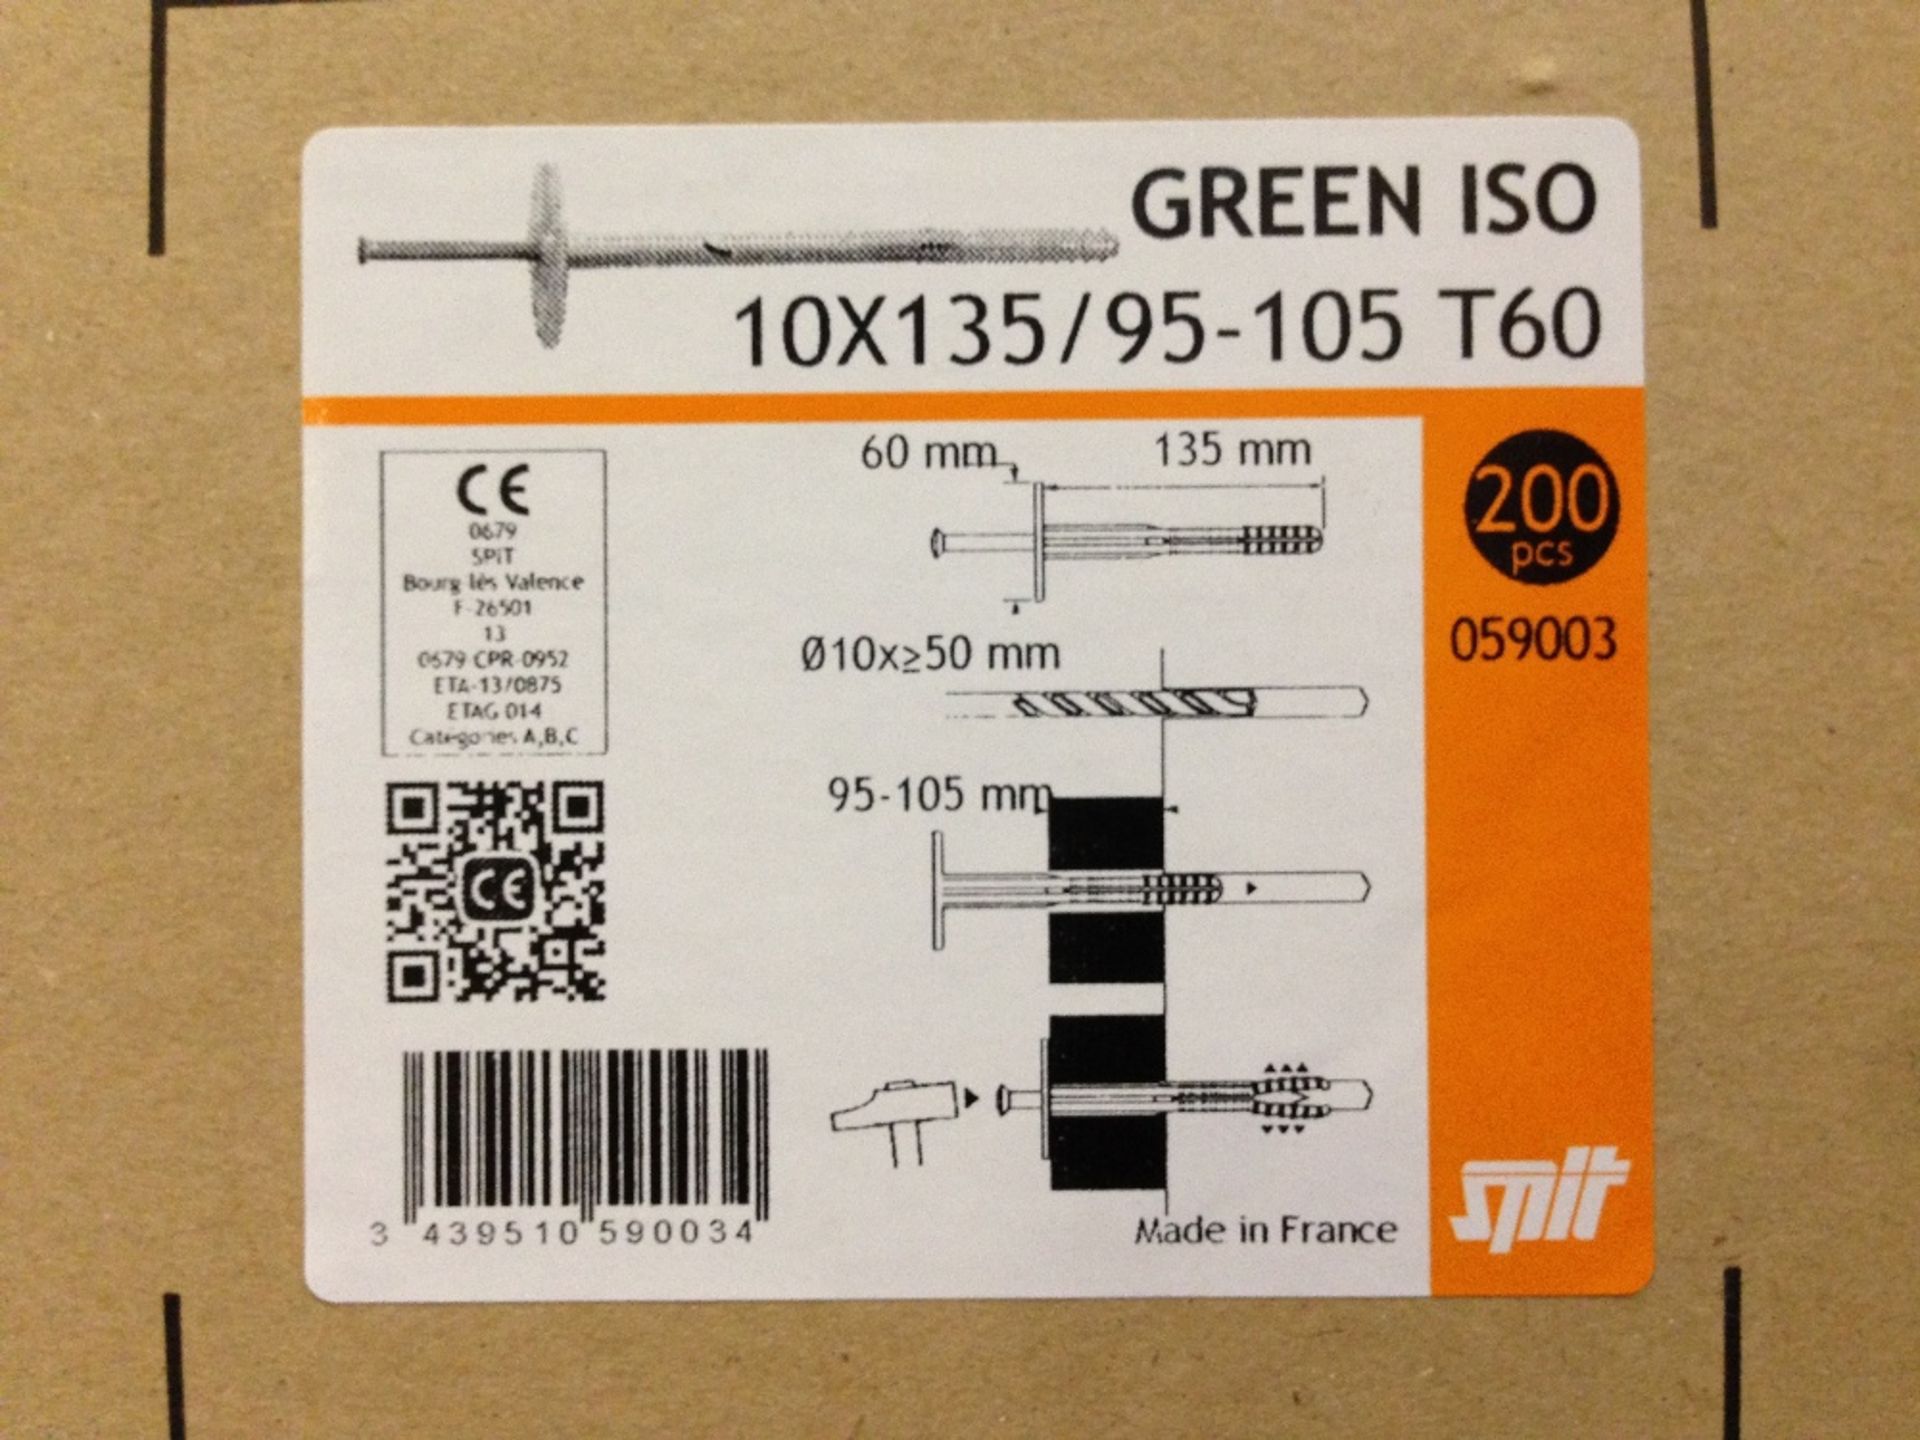 Pallet of SPIT Green Iso 10x135/95-105 T60 nailed in plastic anchors 40 boxes x 200 pieces - Image 2 of 2